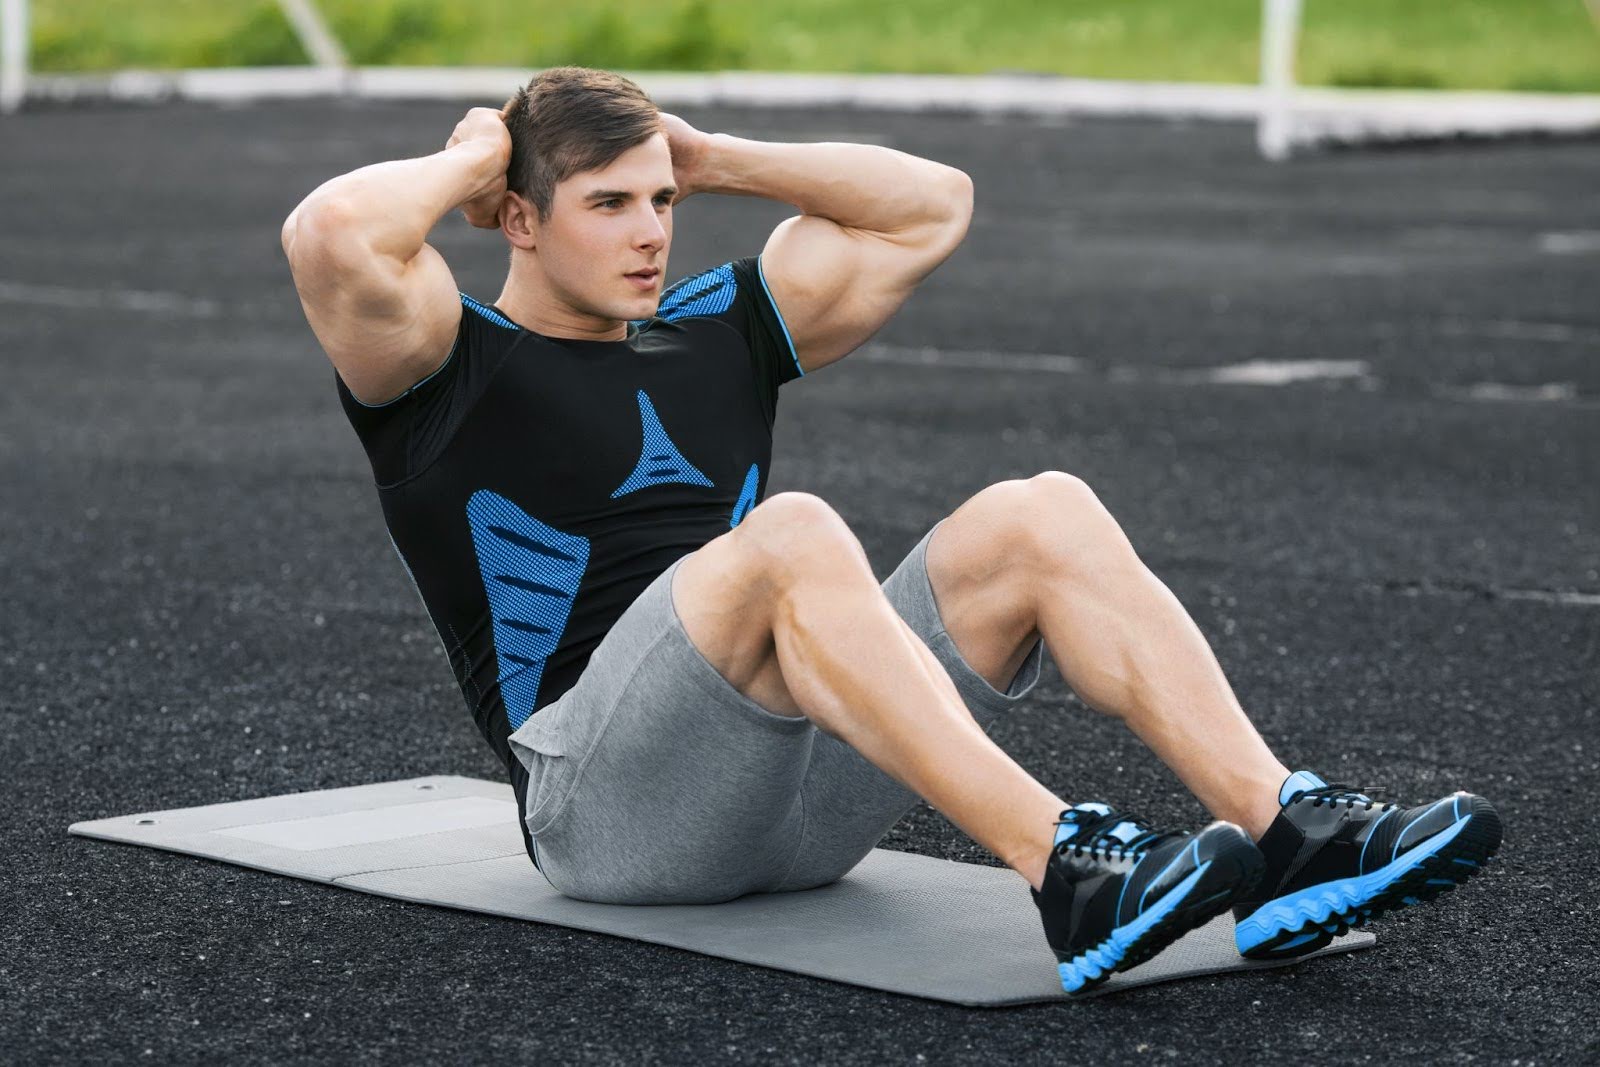 Fit young man outside performing a sit up exercise